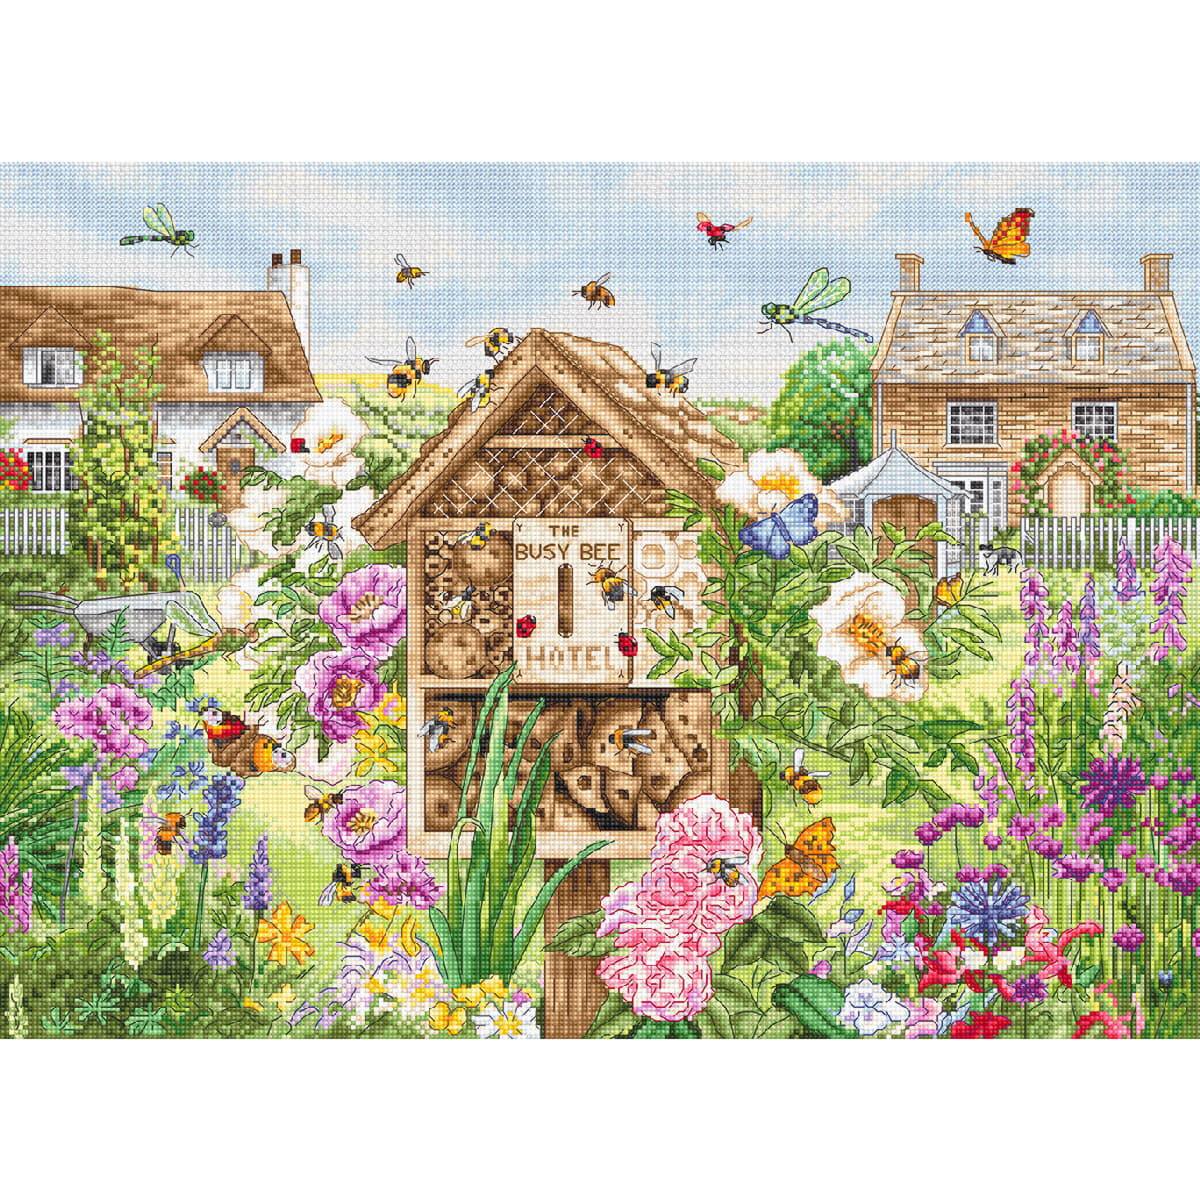 Letistitch counted cross stitch kit "Busy Bee...